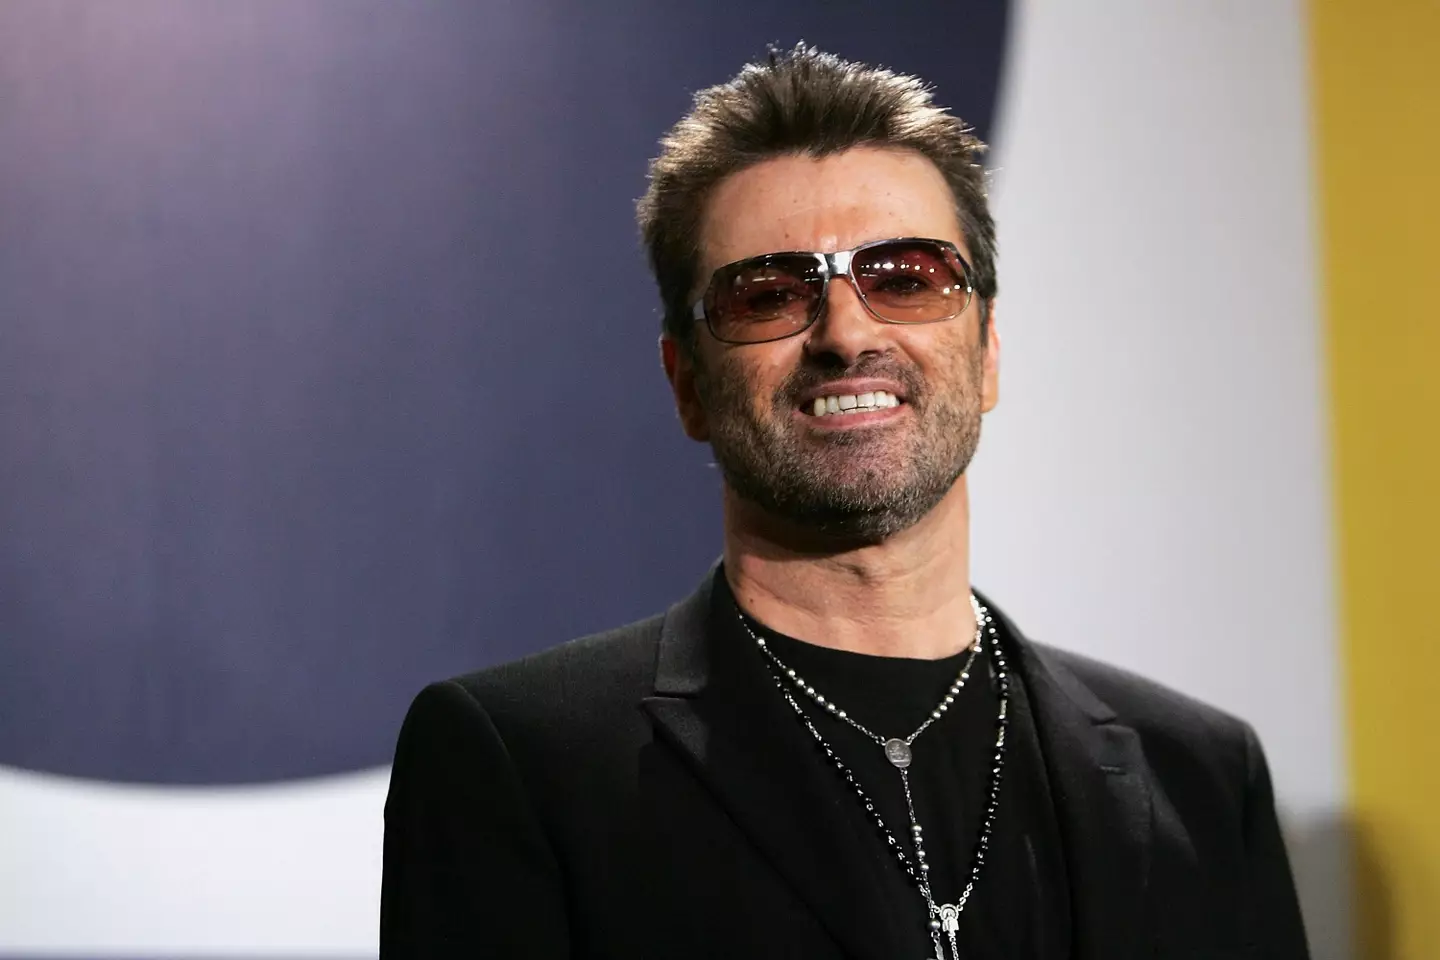 Viewers said the music mogul closely resembled George Michael.